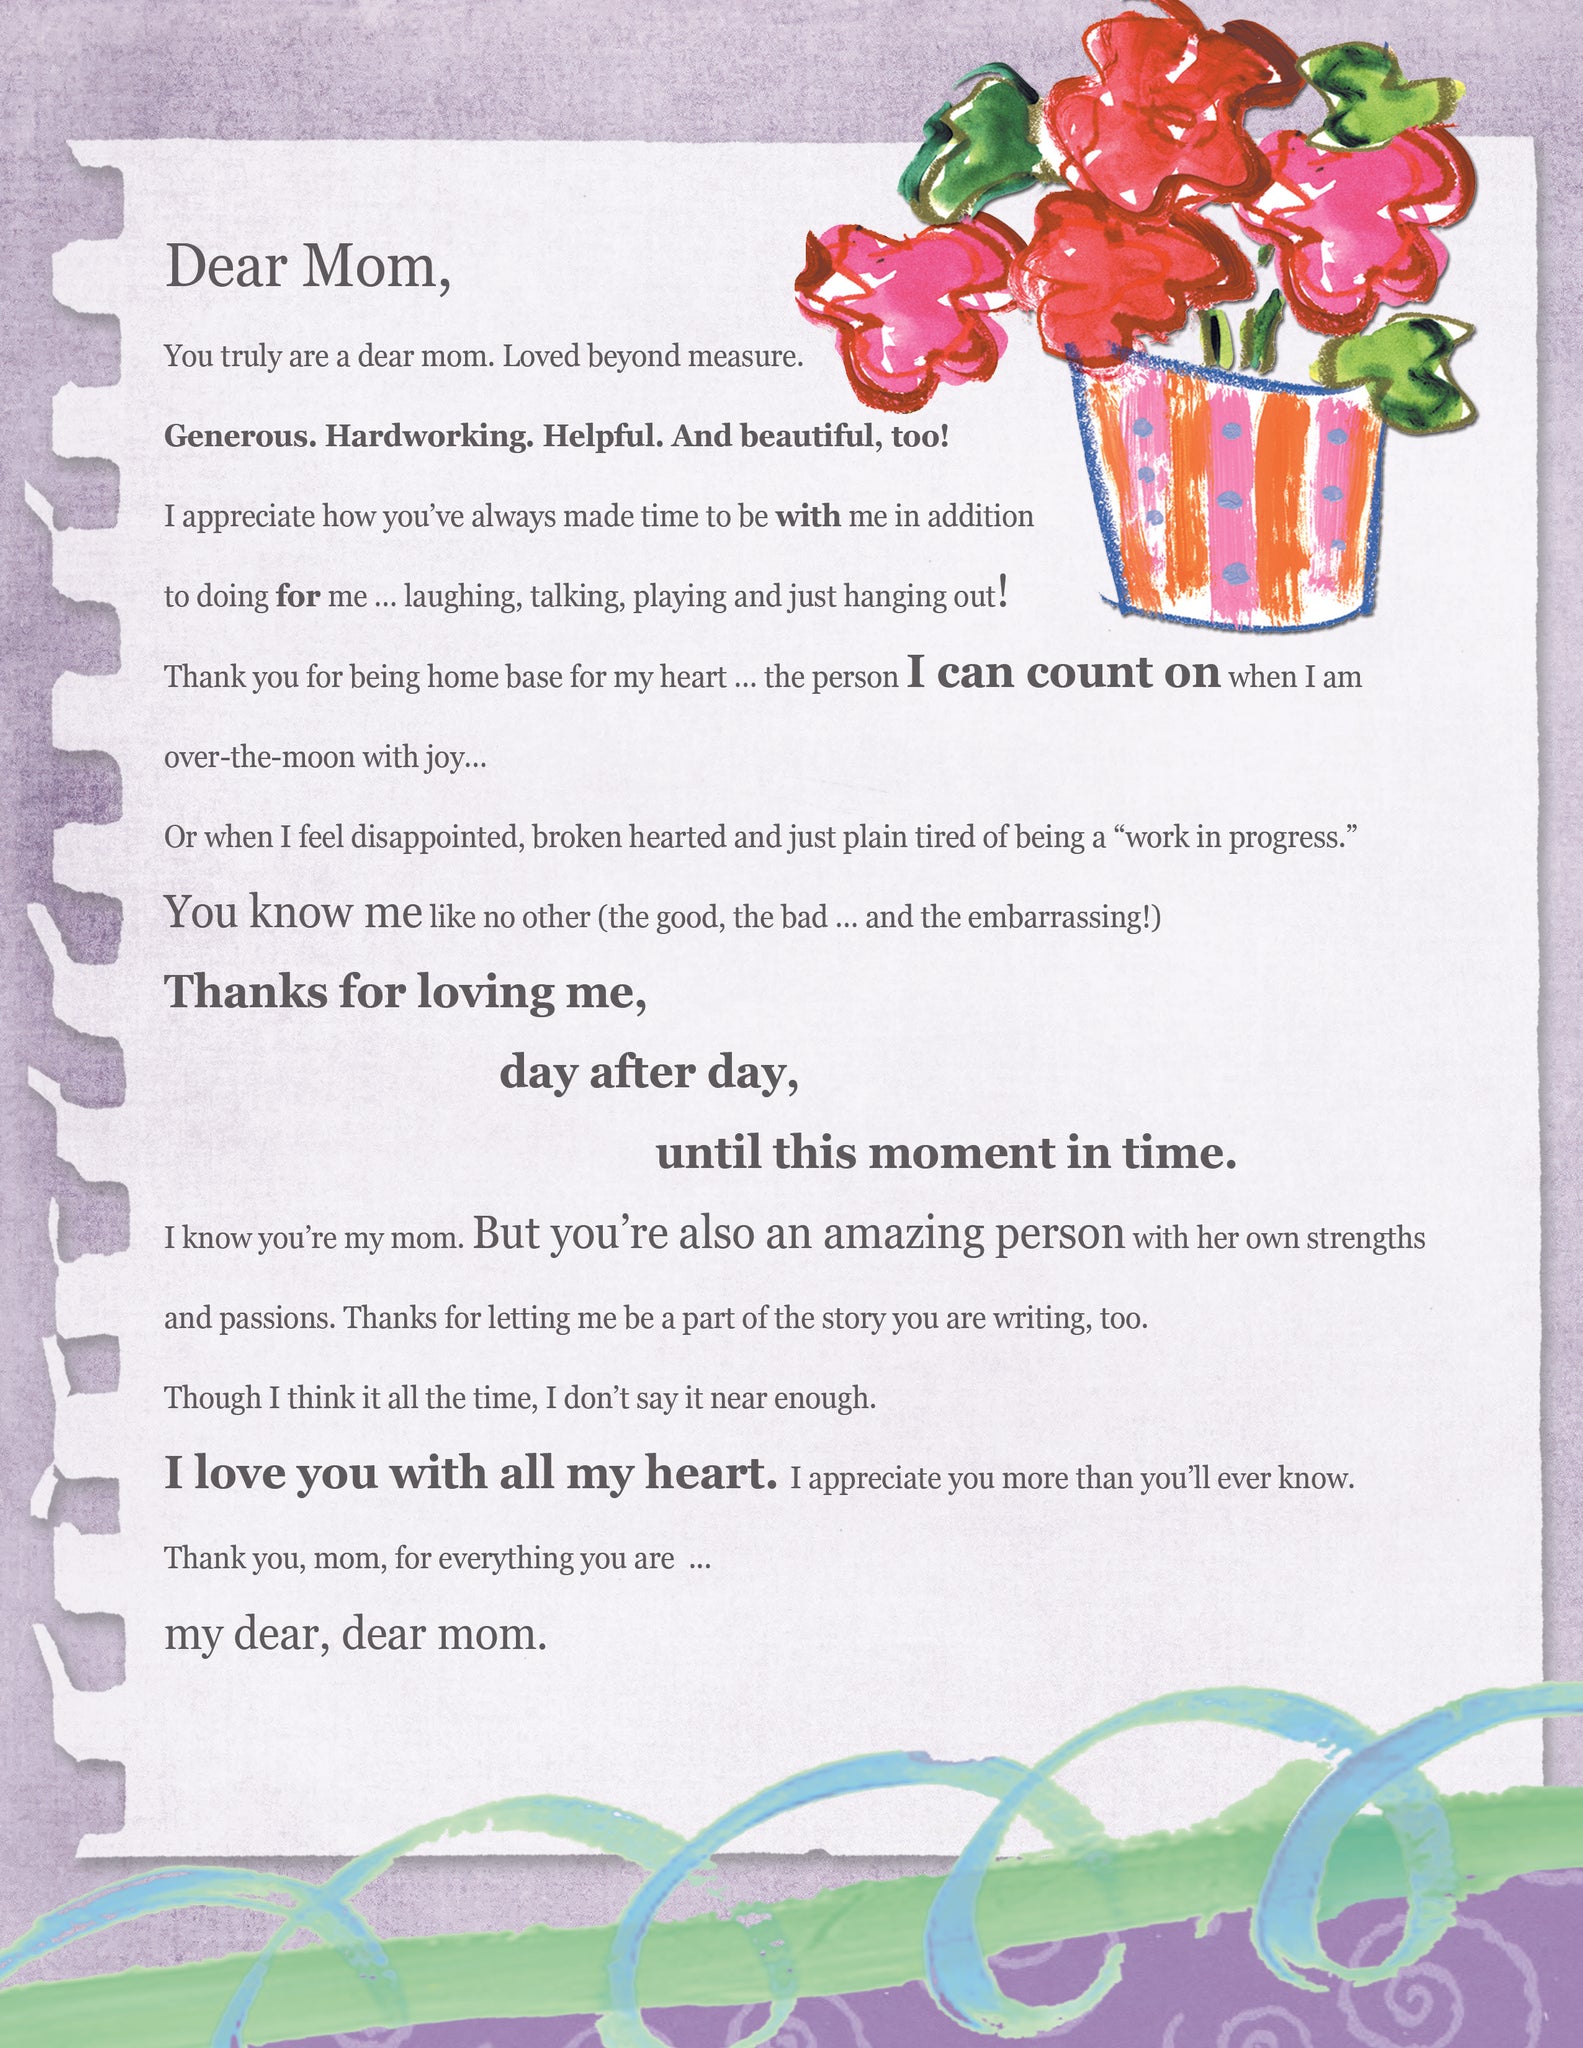 dear mum and dad toothfairy letter